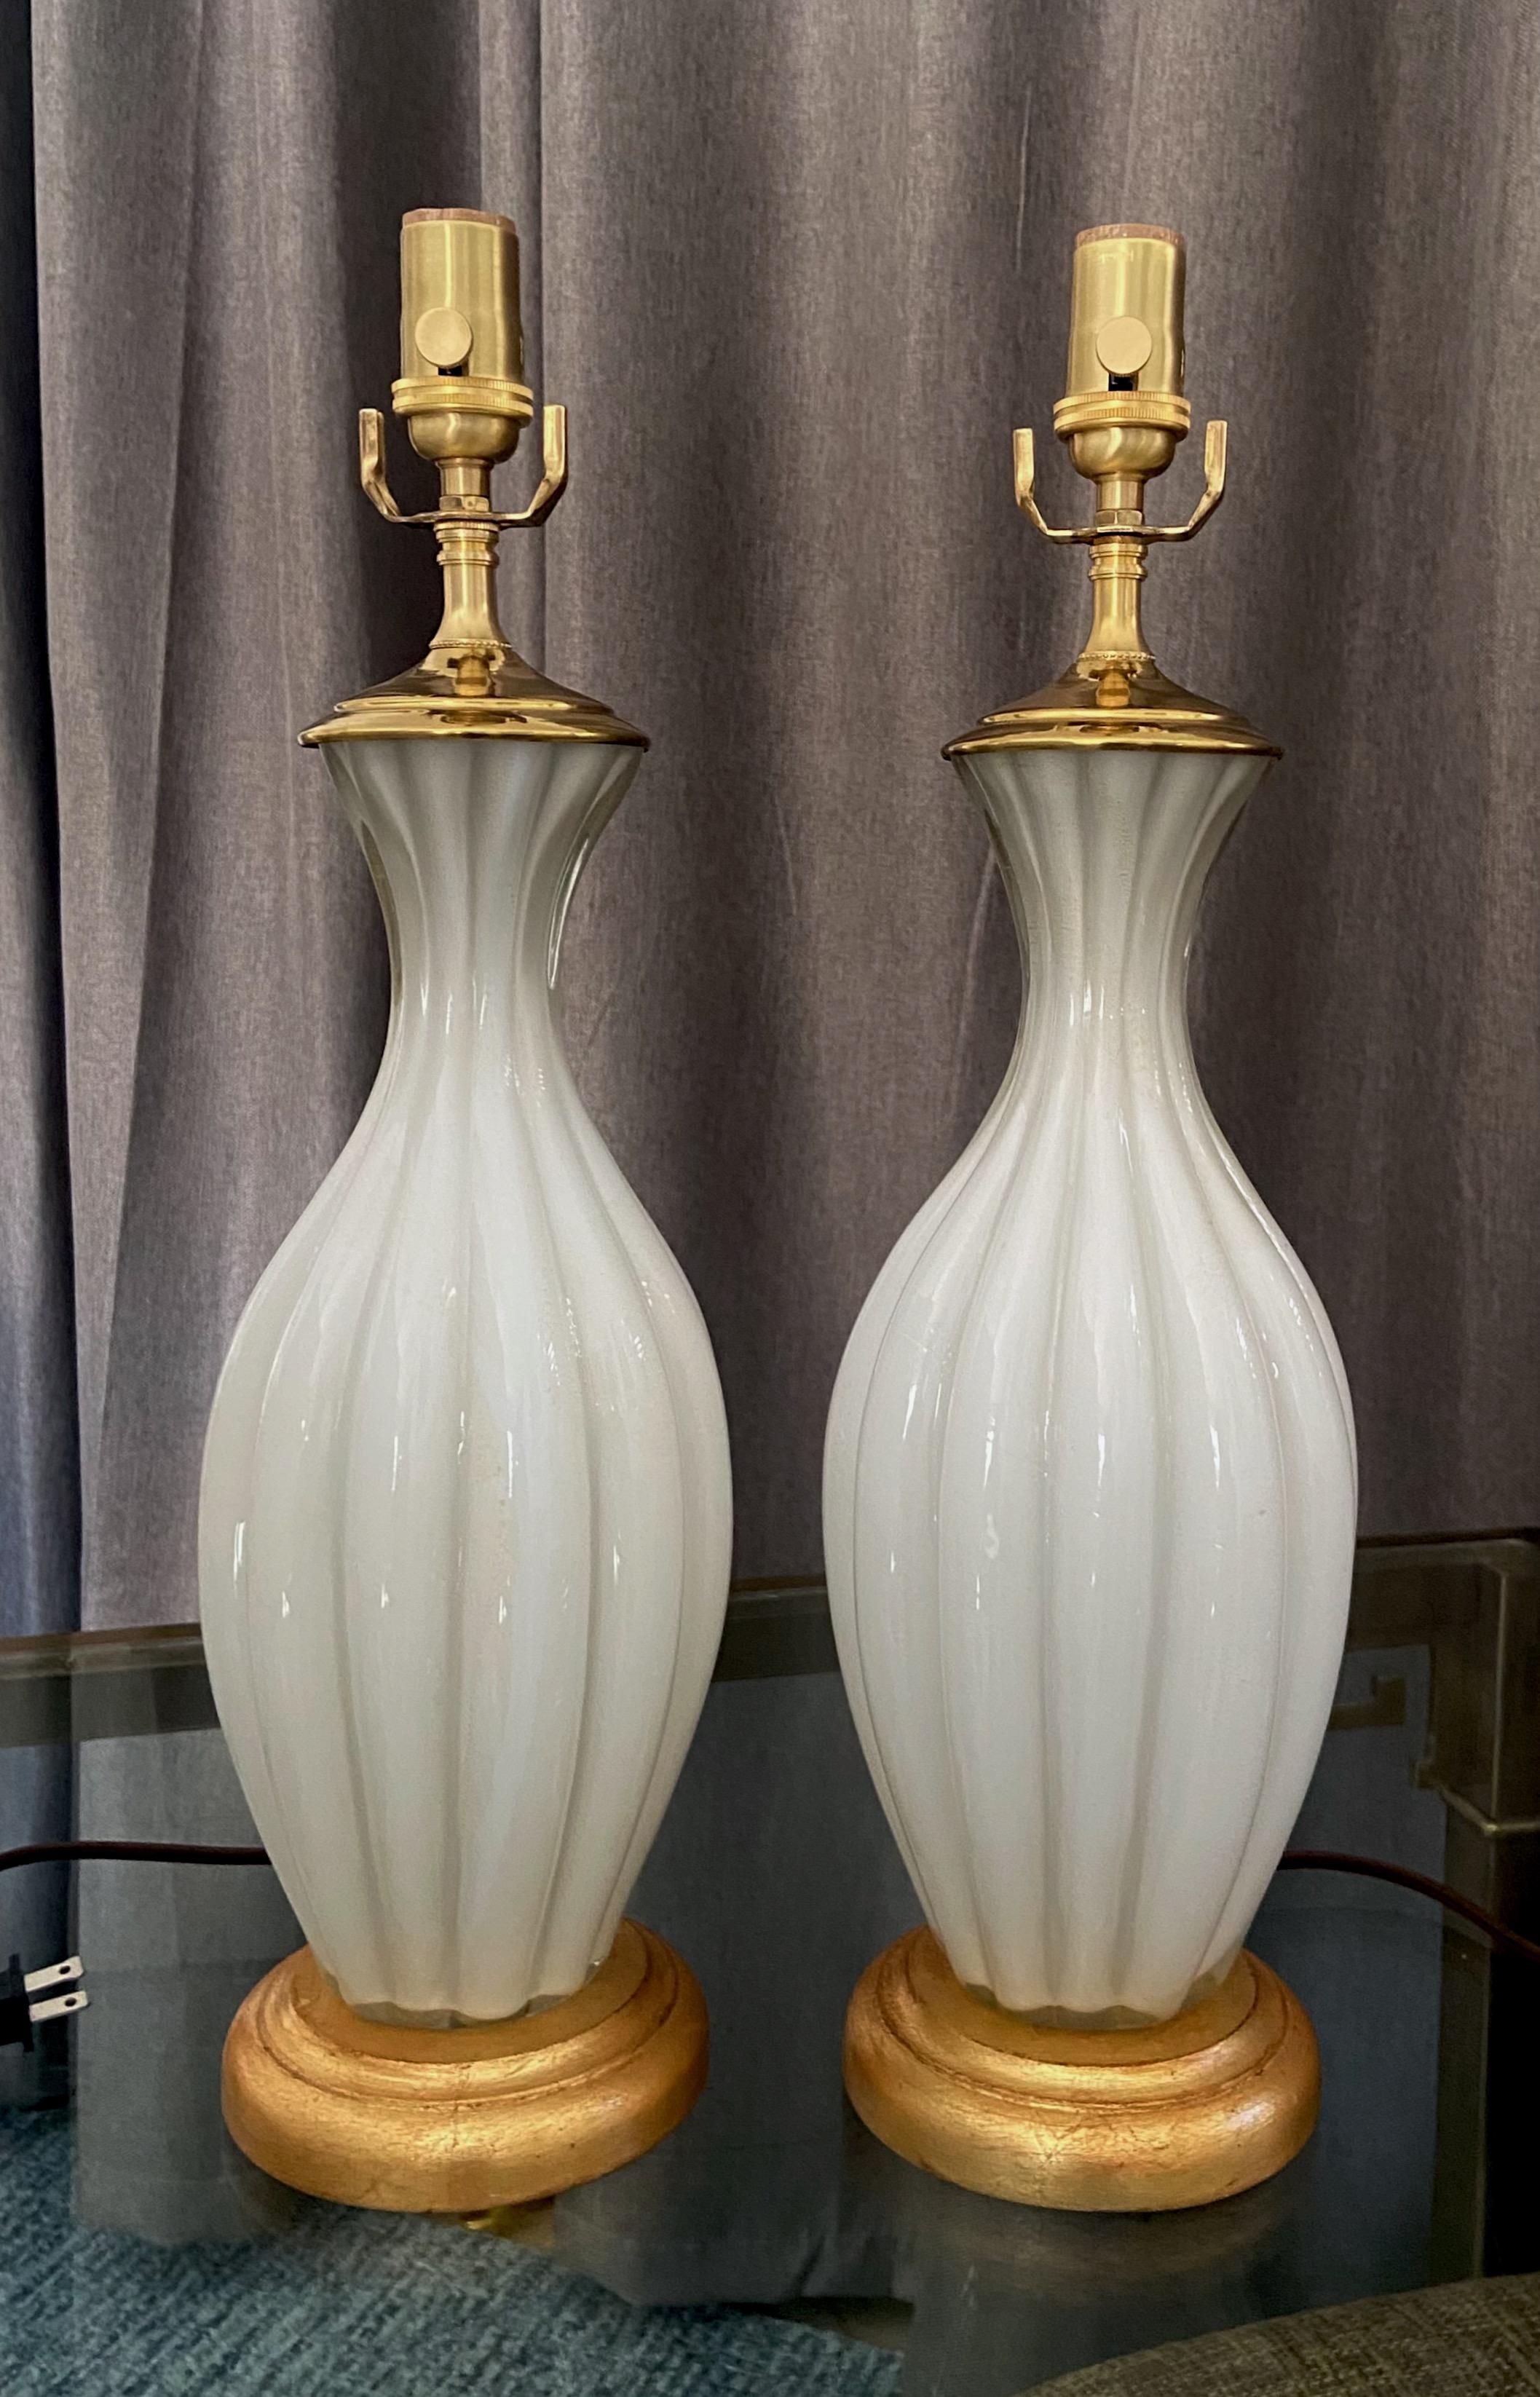 Pair of Murano Italian white cased glass ribbed lamps, mounted giltwood bases. The hand blown case has subtle flakes of gold inclusions. Newly wired for US with new
3-way sockets and rayon covered cords.

Measures: 14